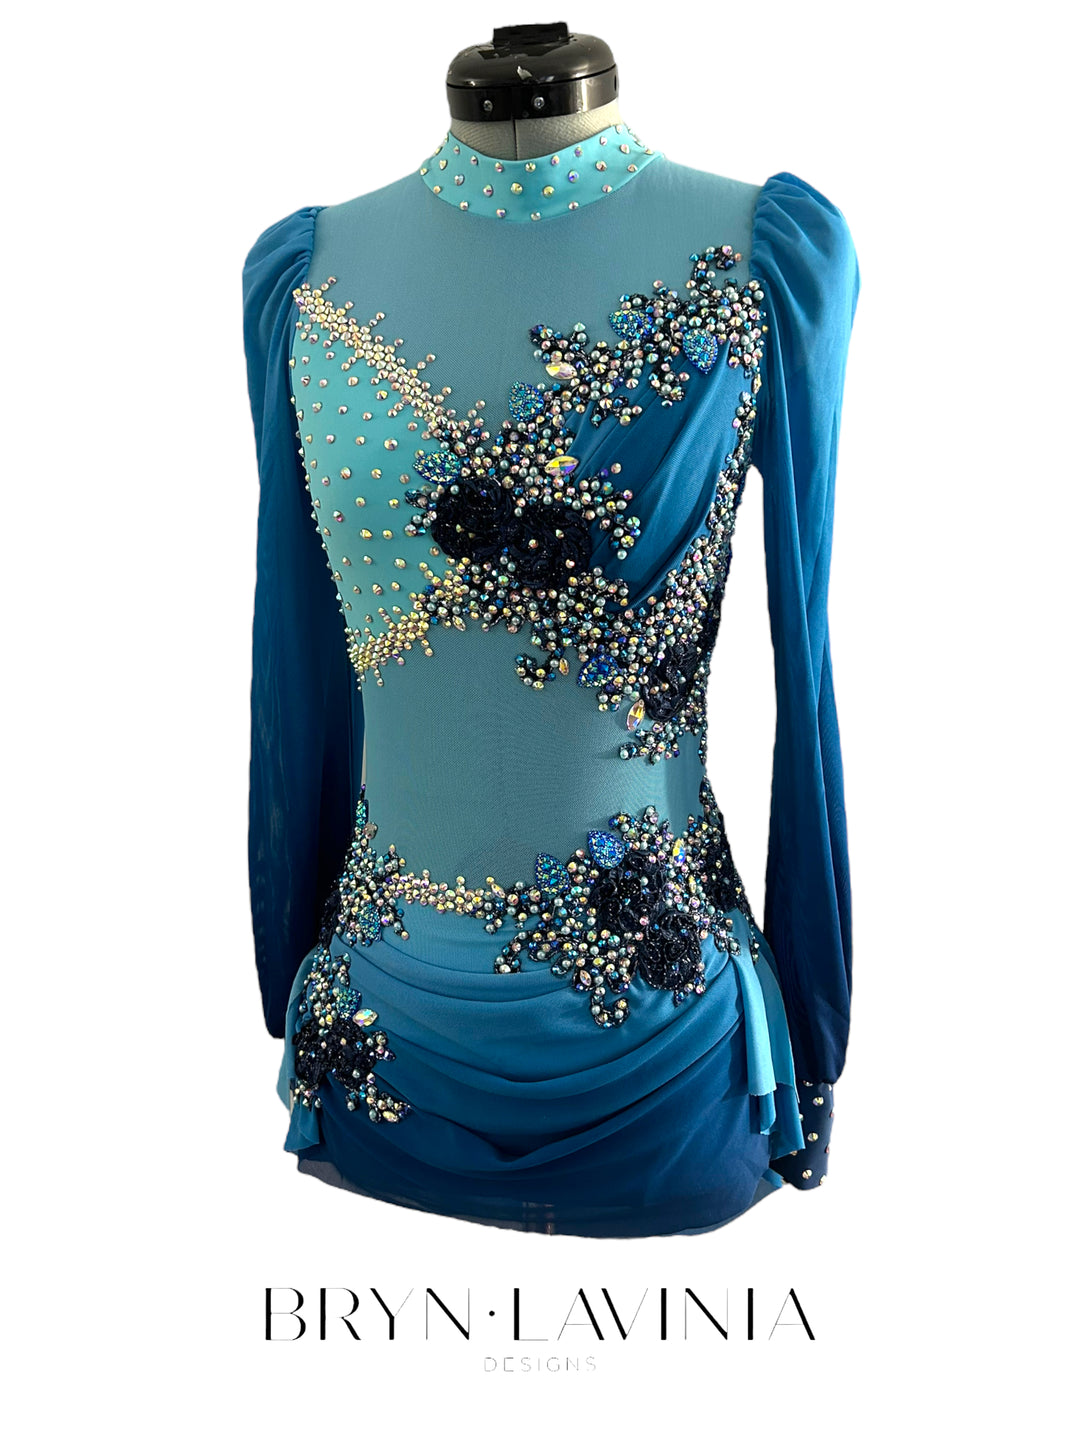 NEW AXS Blue Ombré ready to ship costume